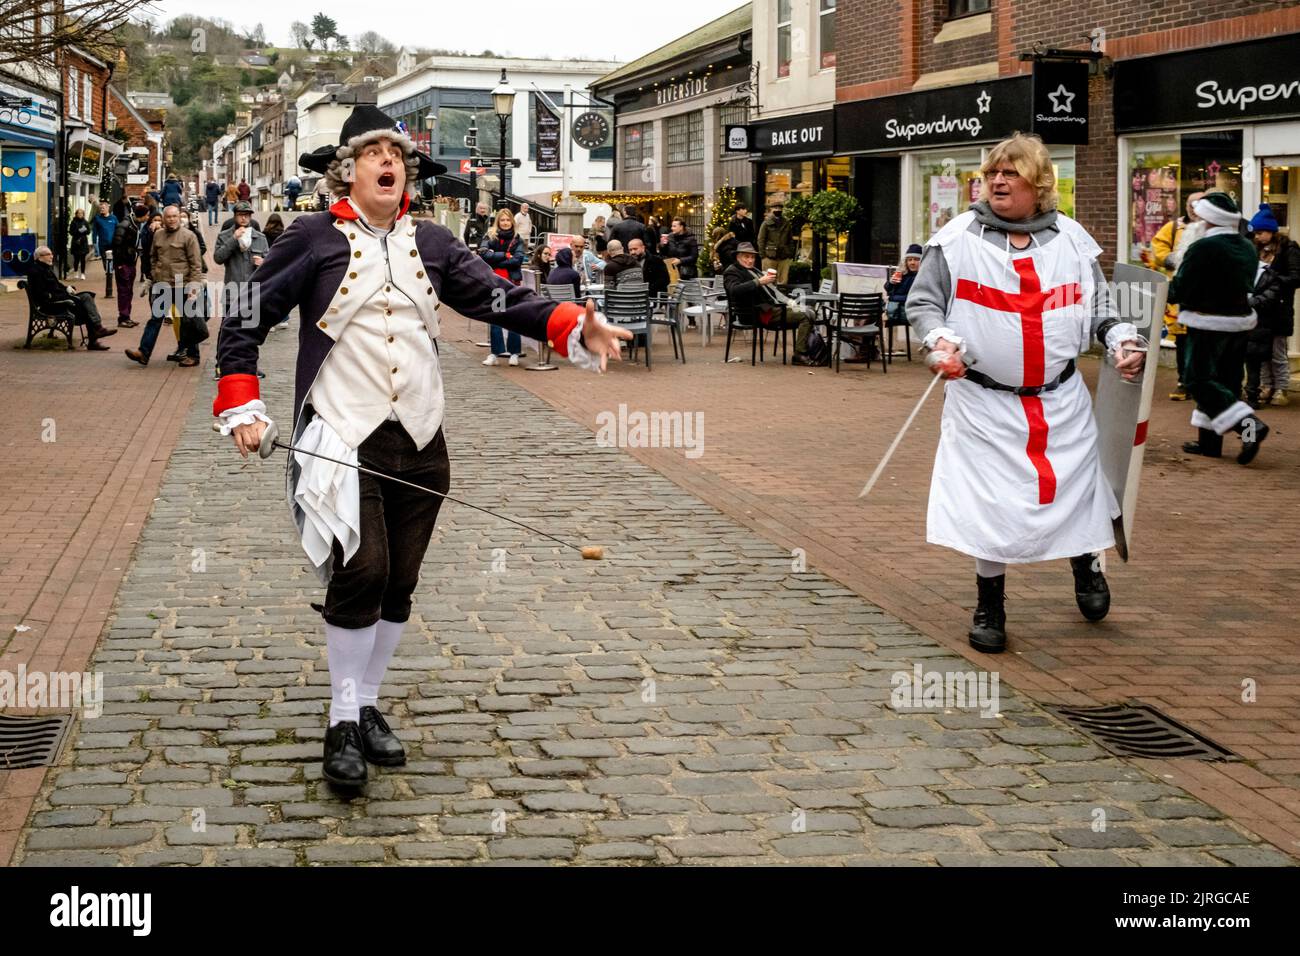 Sompting Village Morris Men Perform A Traditional Mummers Play In The High Street, Lewes, East Sussex, UK. Stock Photo